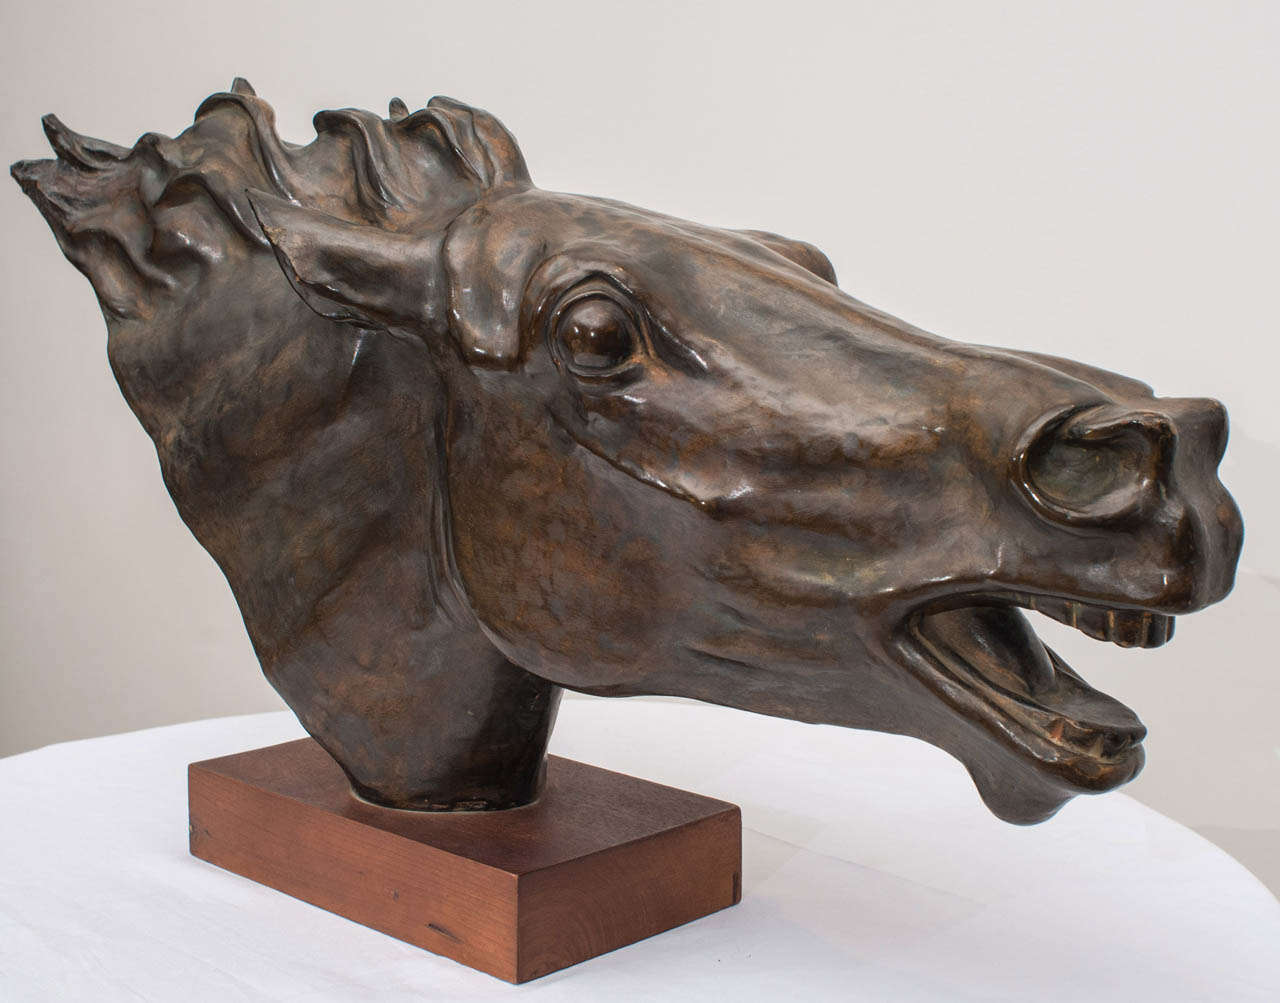 An Italian terracotta sculpture depicting the head of a running horse. The work is has a bronze overlay surface with a deep rich patina.